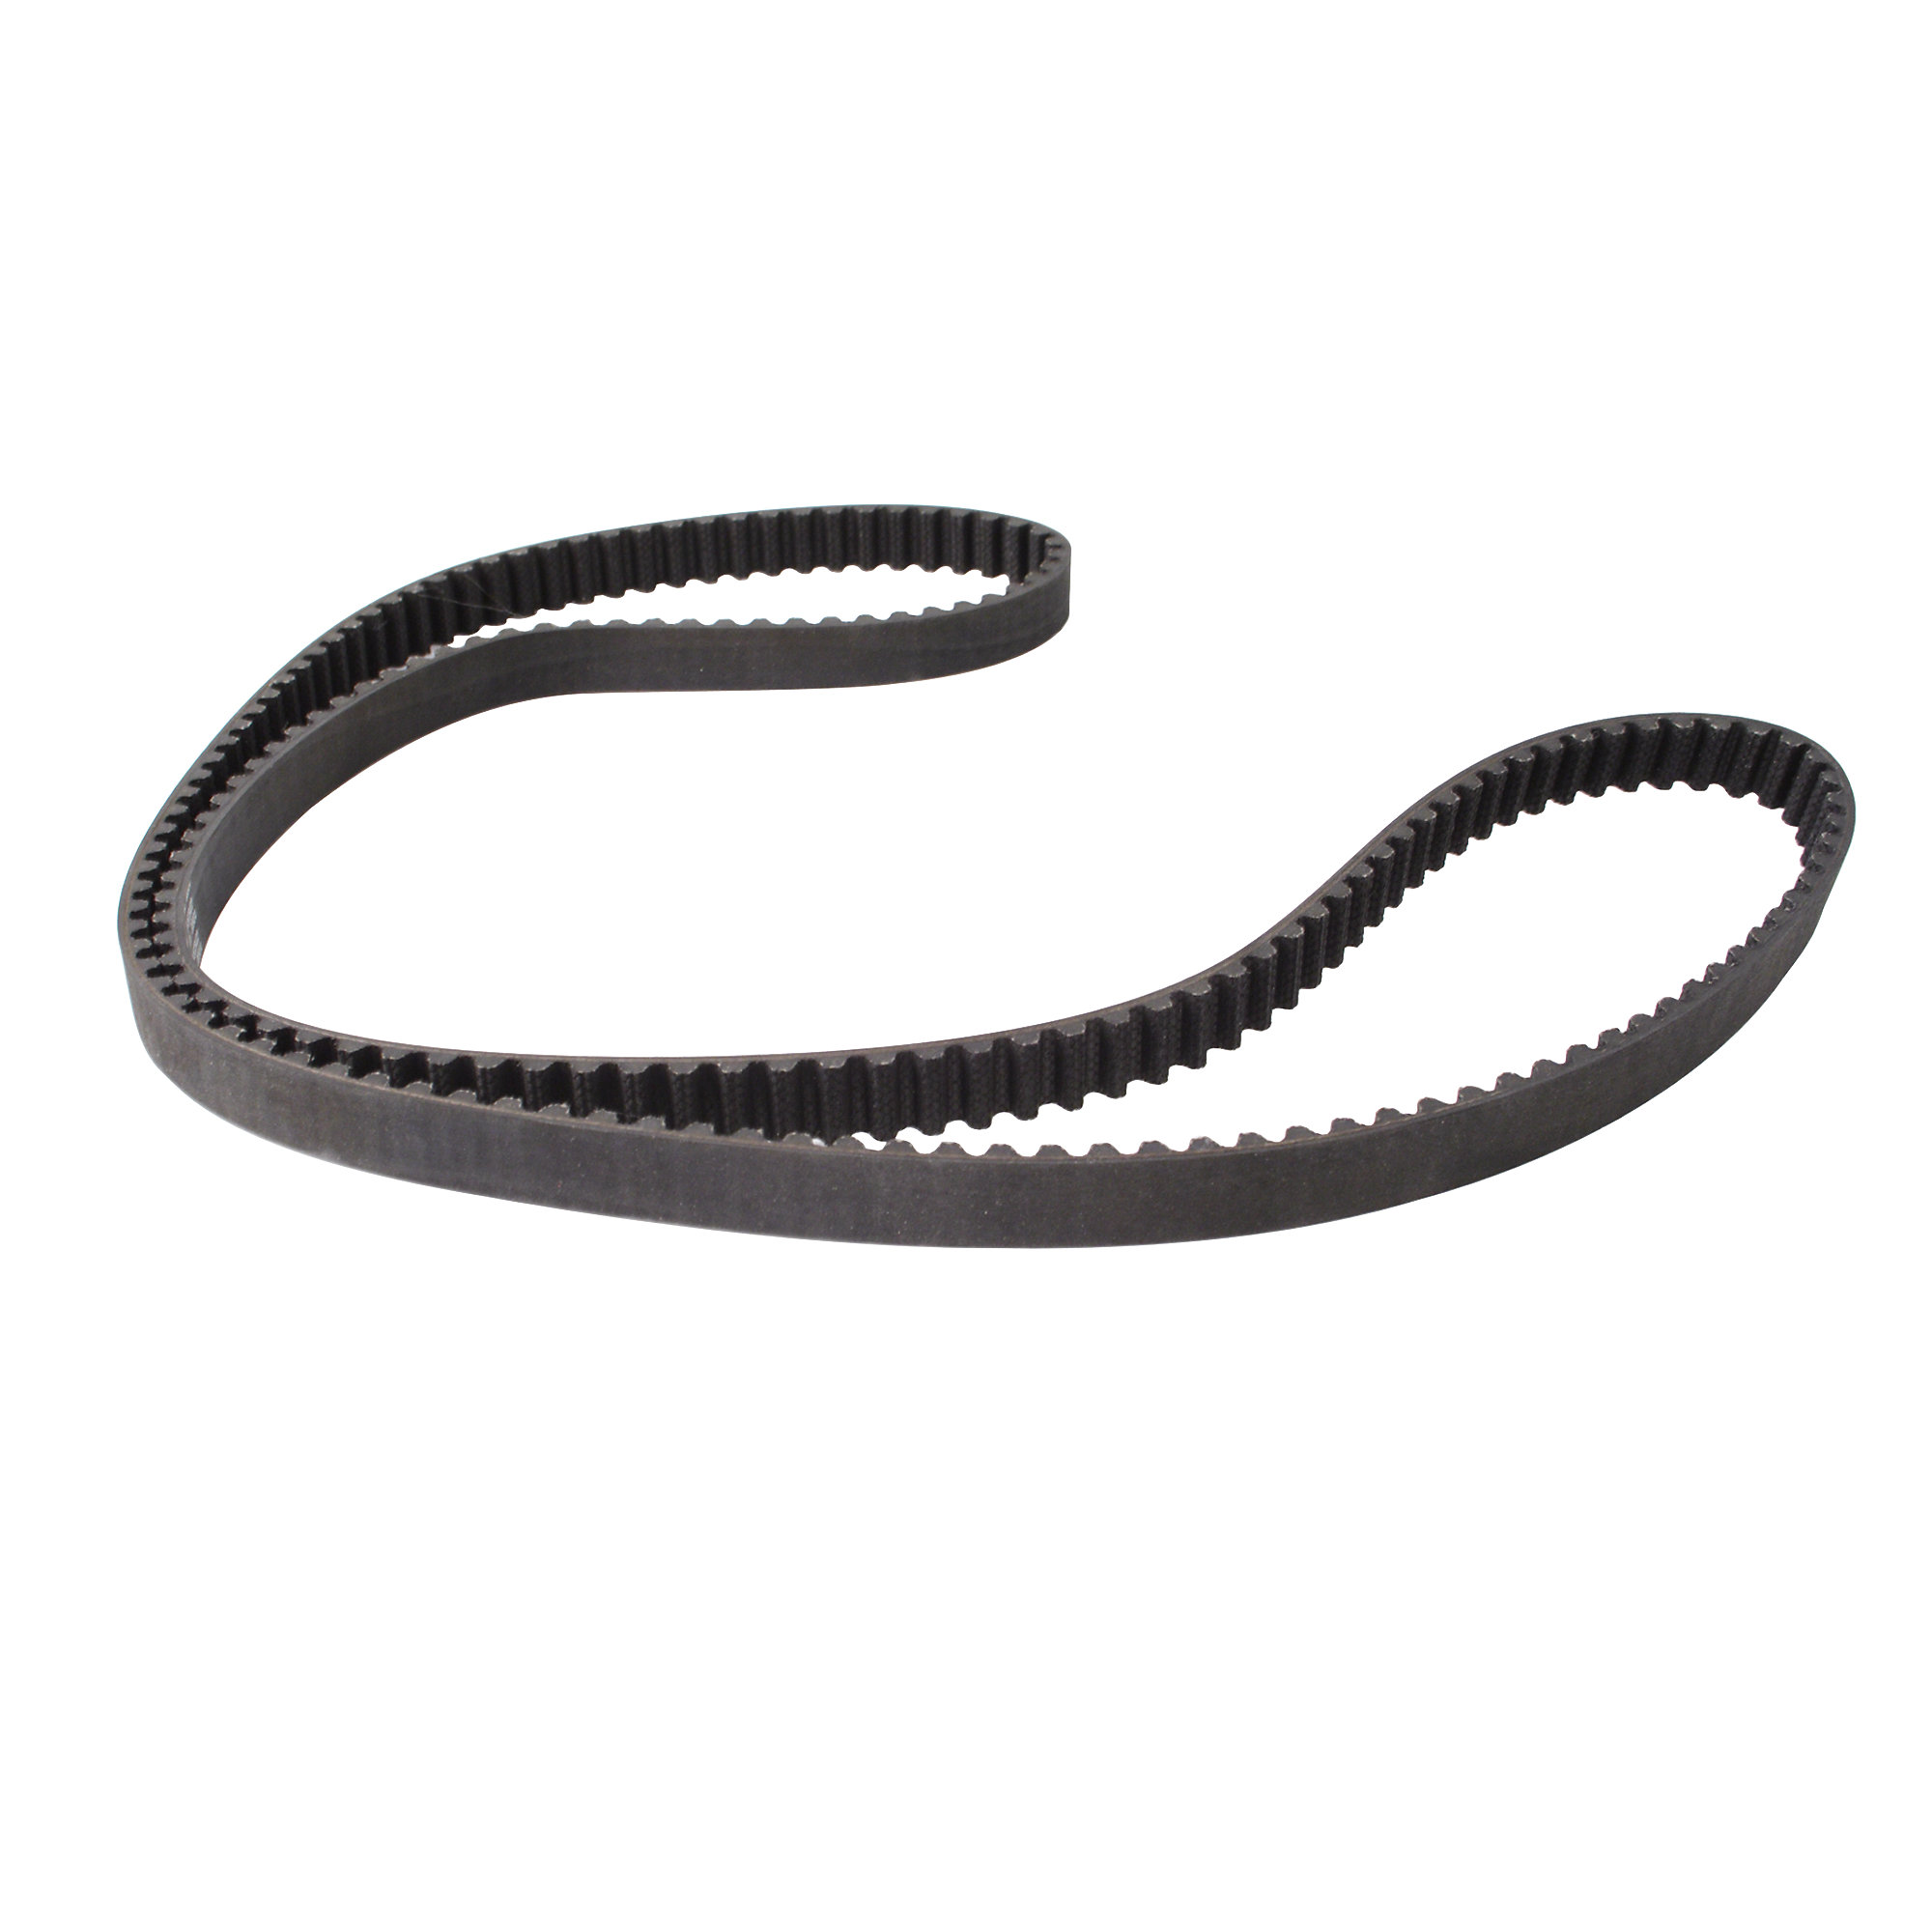 Timing Belt for Flywheel | Stairmaster 3400CE and 3800RC Momentum Bikes